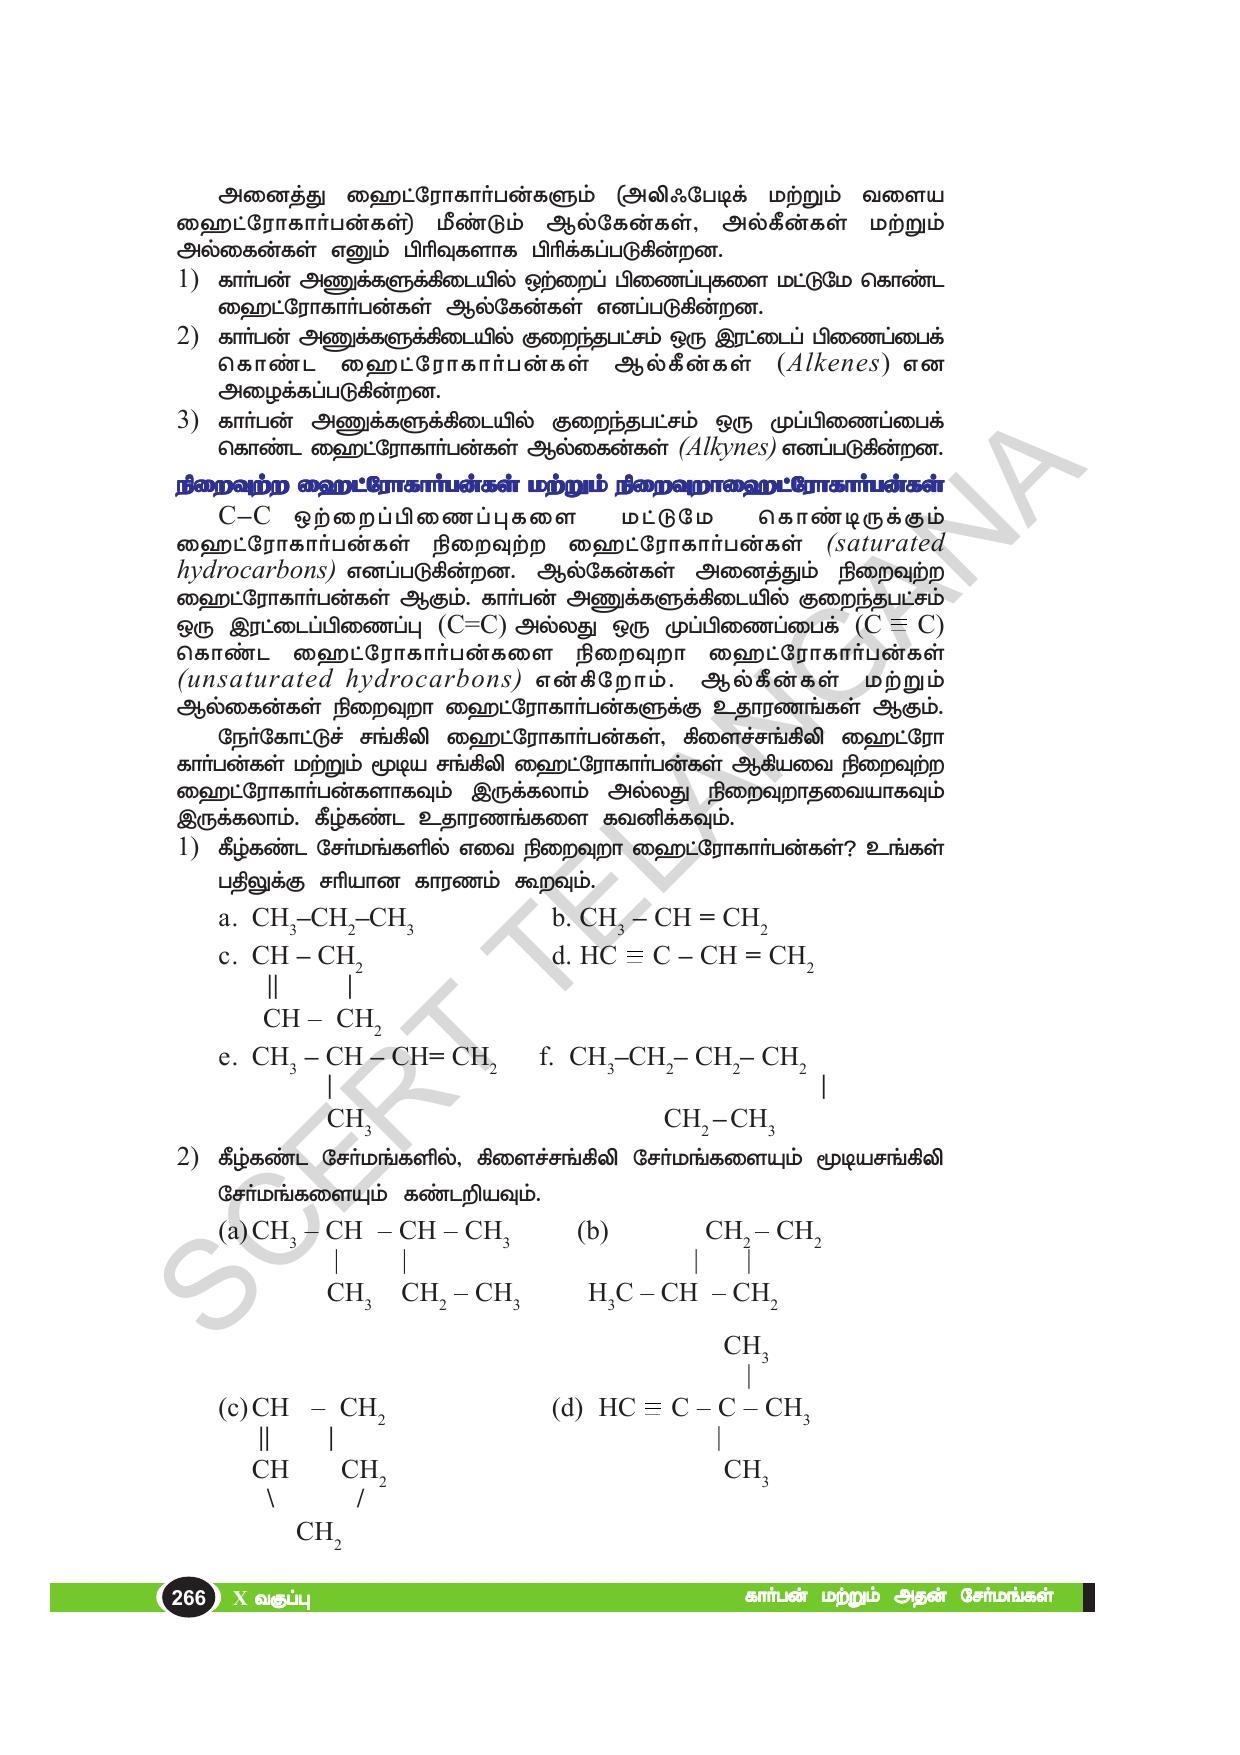 TS SCERT Class 10 Physical Science(Tamil Medium) Text Book - Page 278